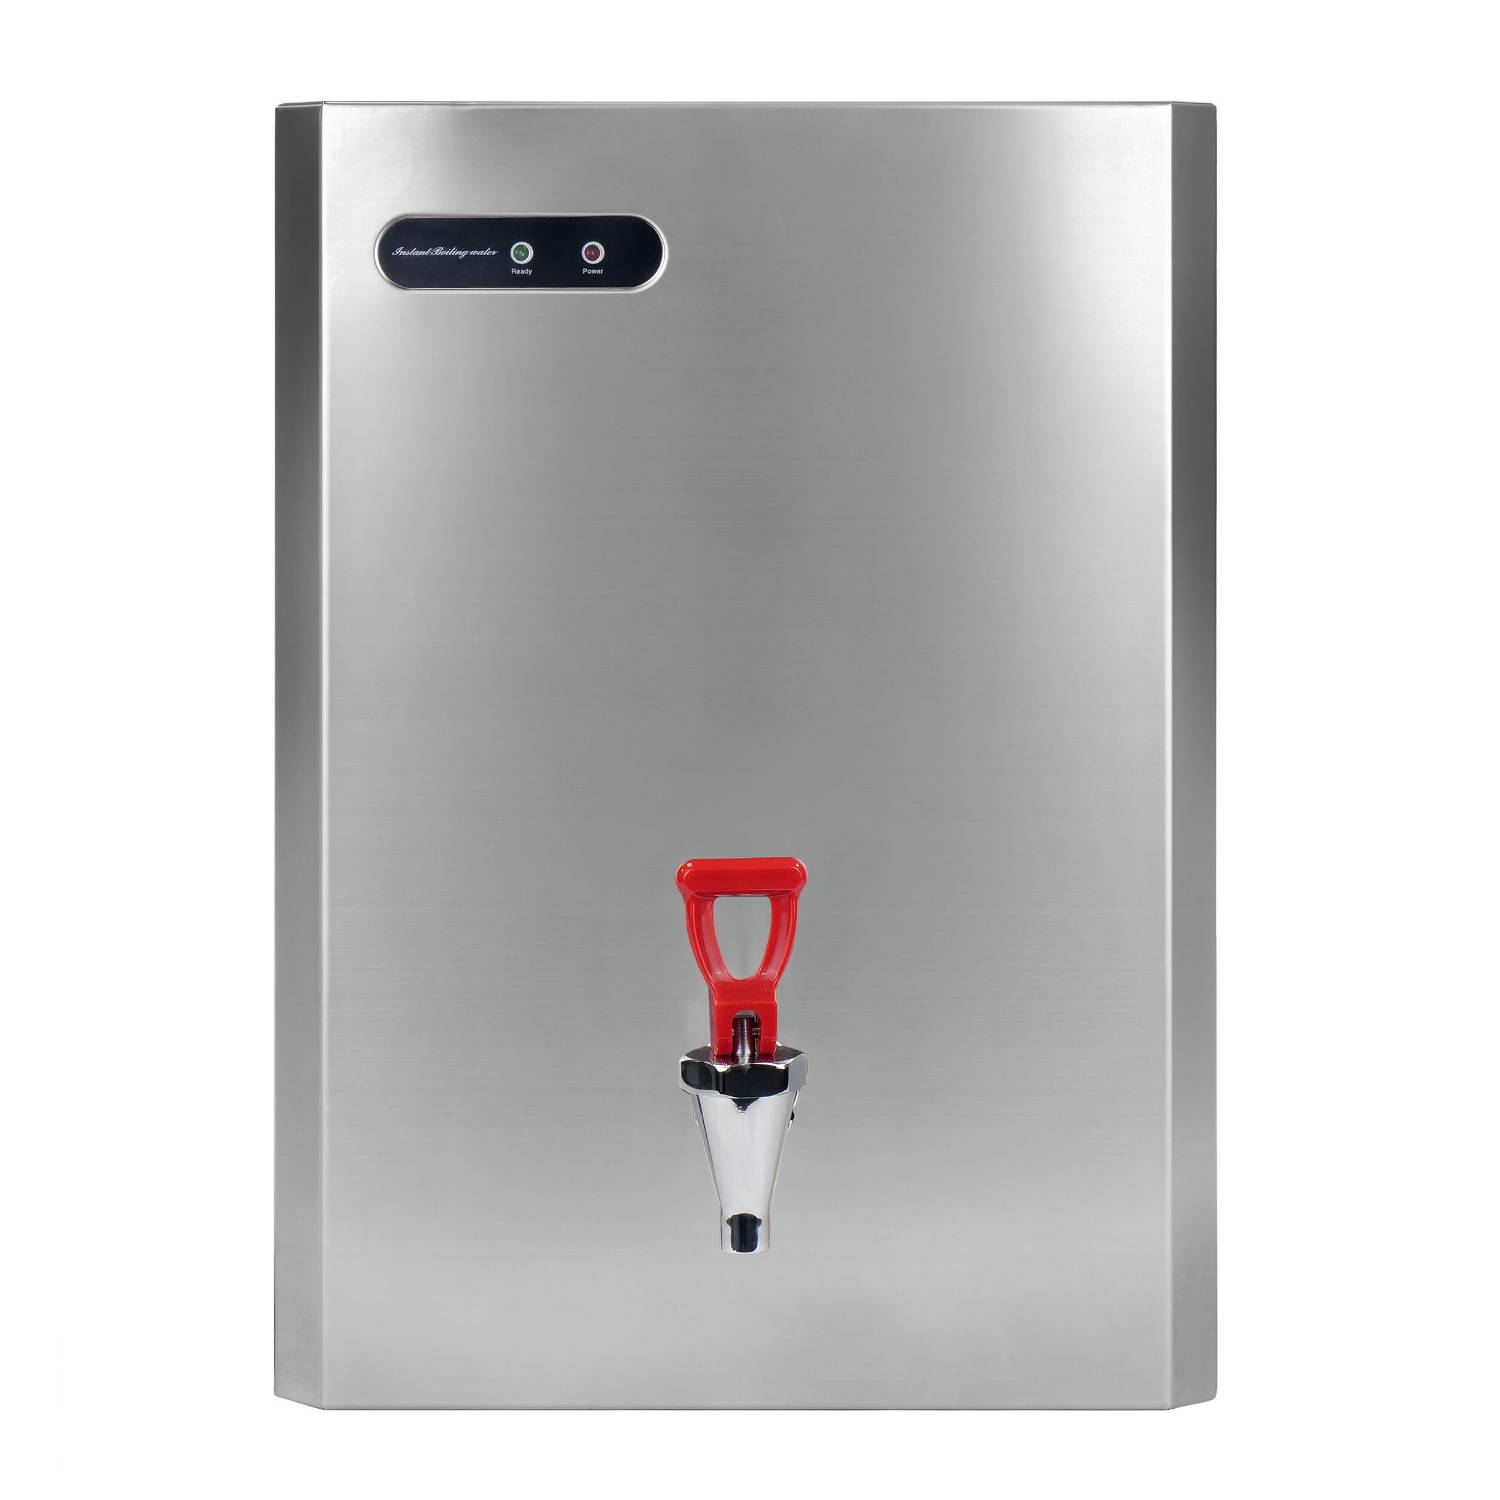 Quench Wall Mounted Water Boiler - Boiling Water Dispenser